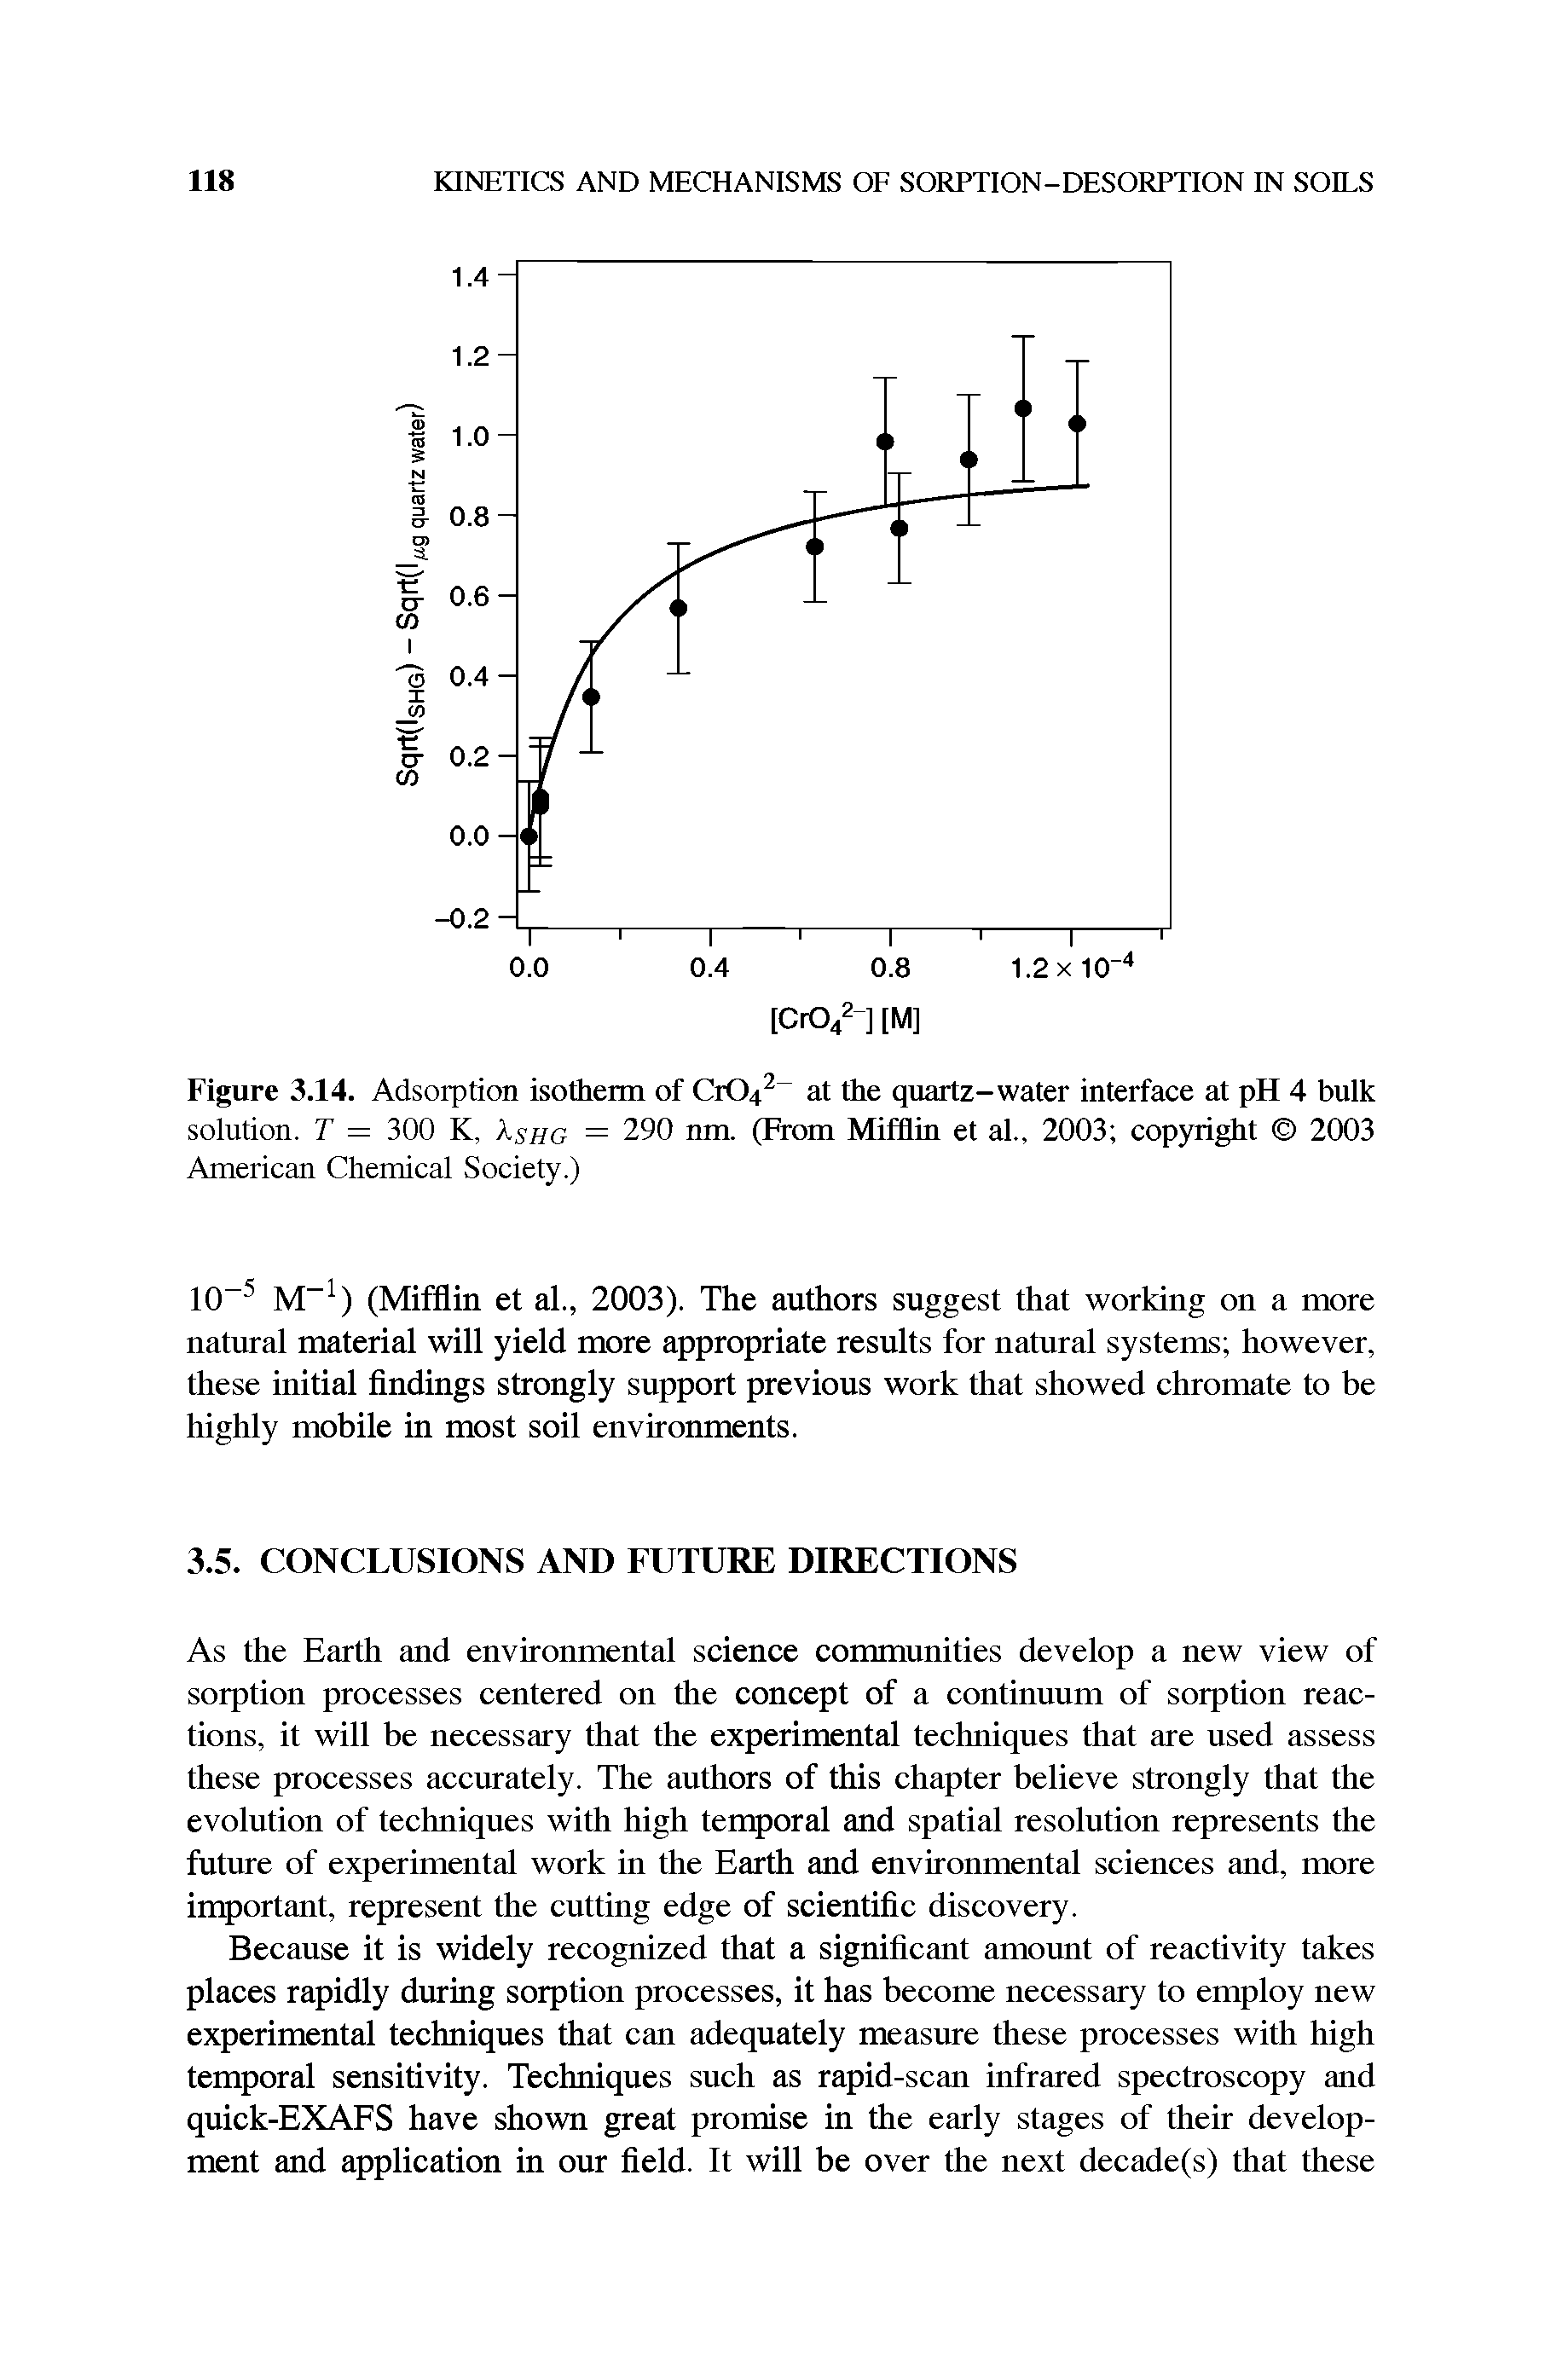 Figure 3.14. Adsorption isothenn of 0104 at the quartz-water interface at pH 4 bulk solution. T = 300 K. ksnc = 290 nm. (From Mifflin et al., 2003 copyright 2003 American Chemical Society.)...